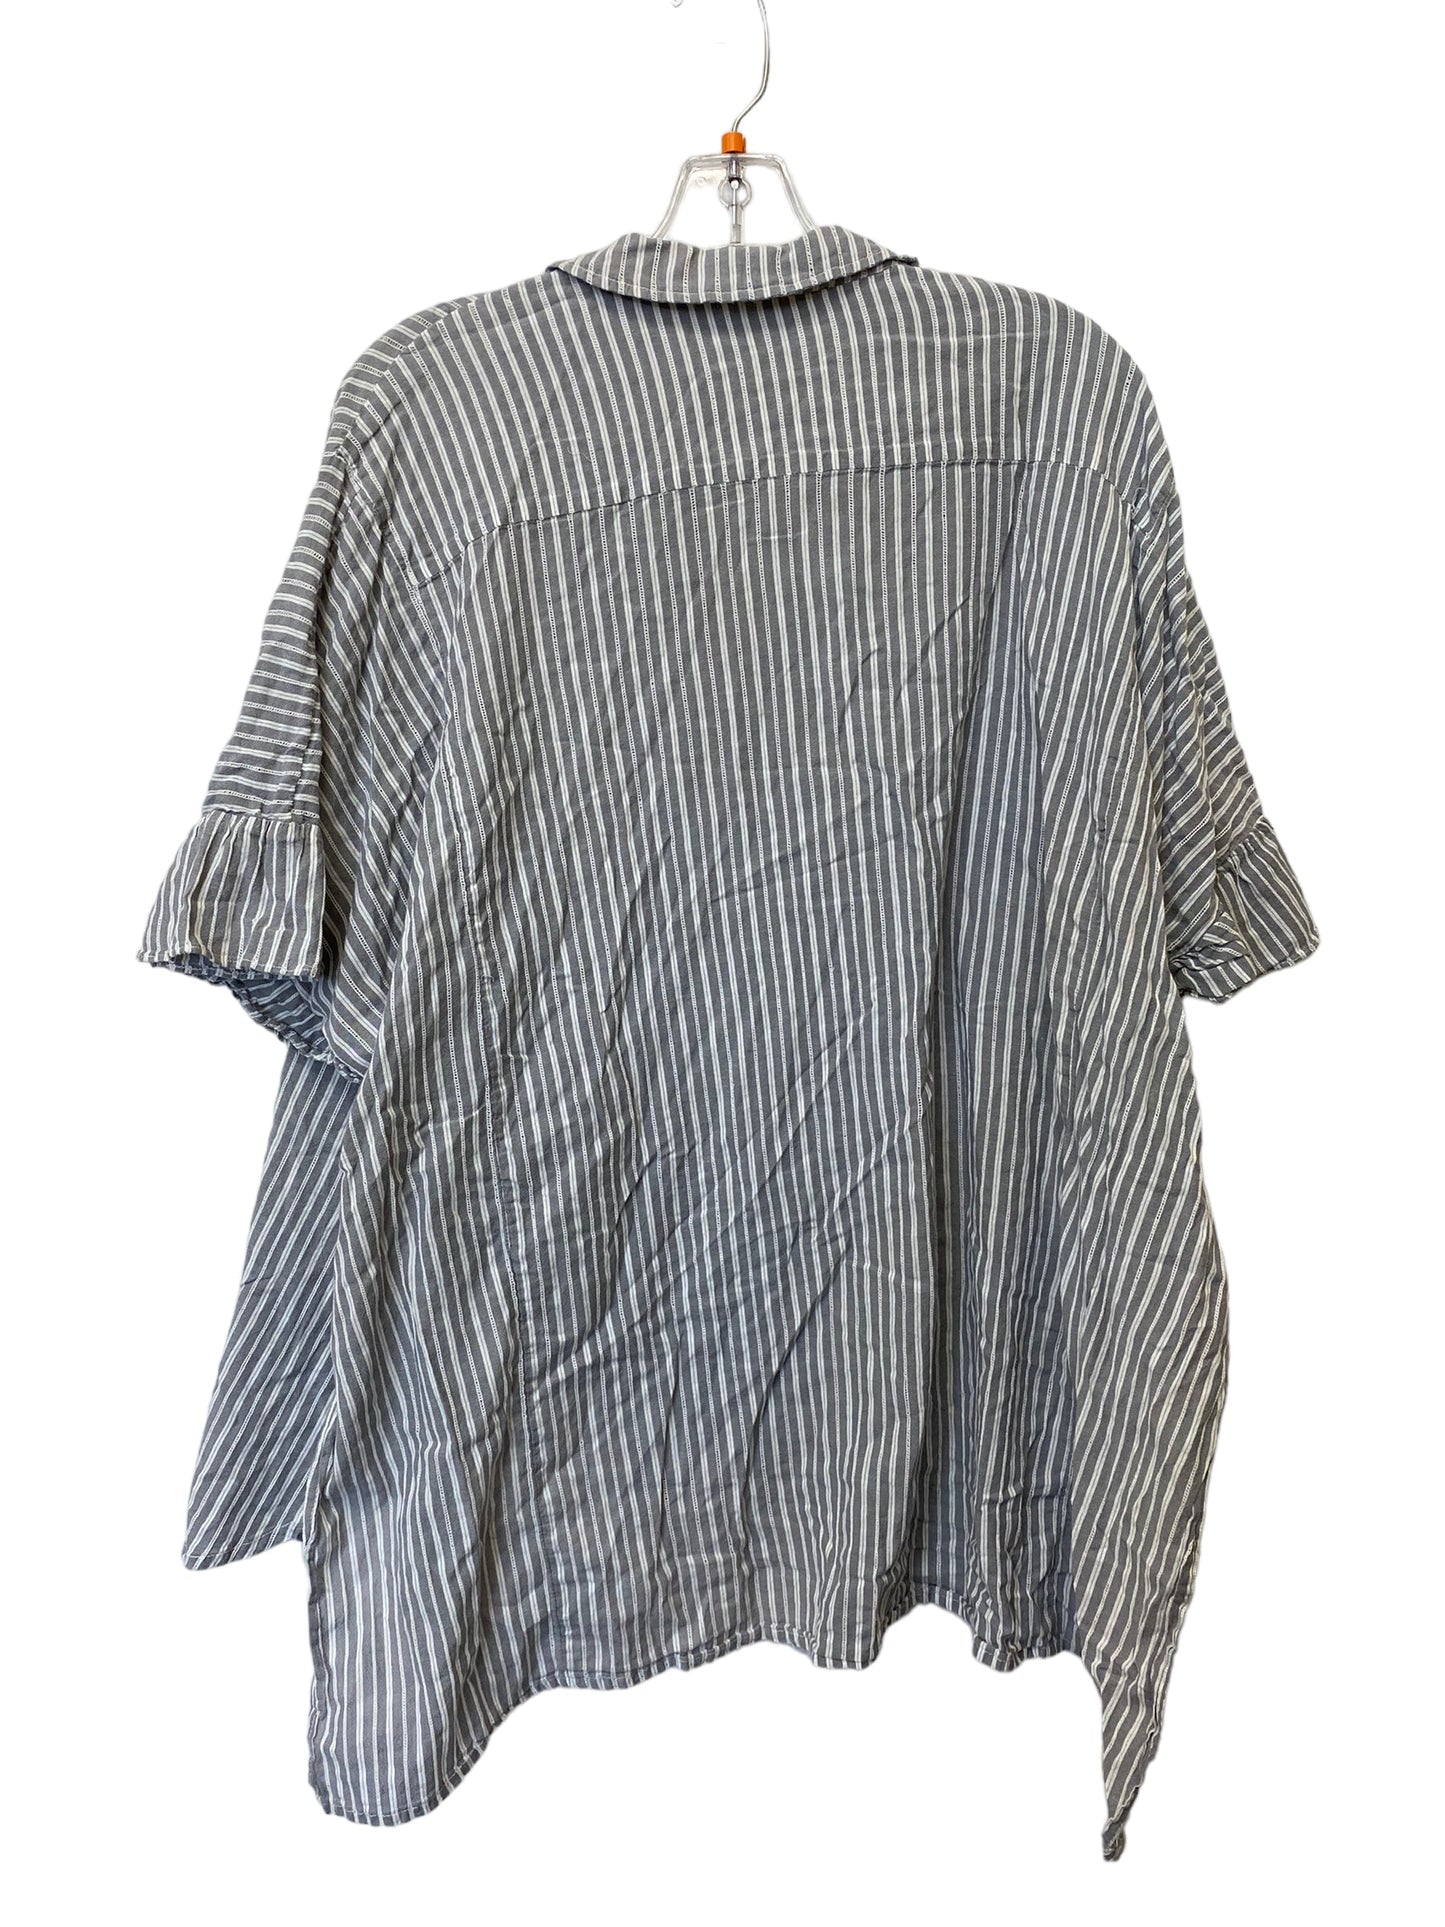 Top Short Sleeve By Maeve  Size: Xs